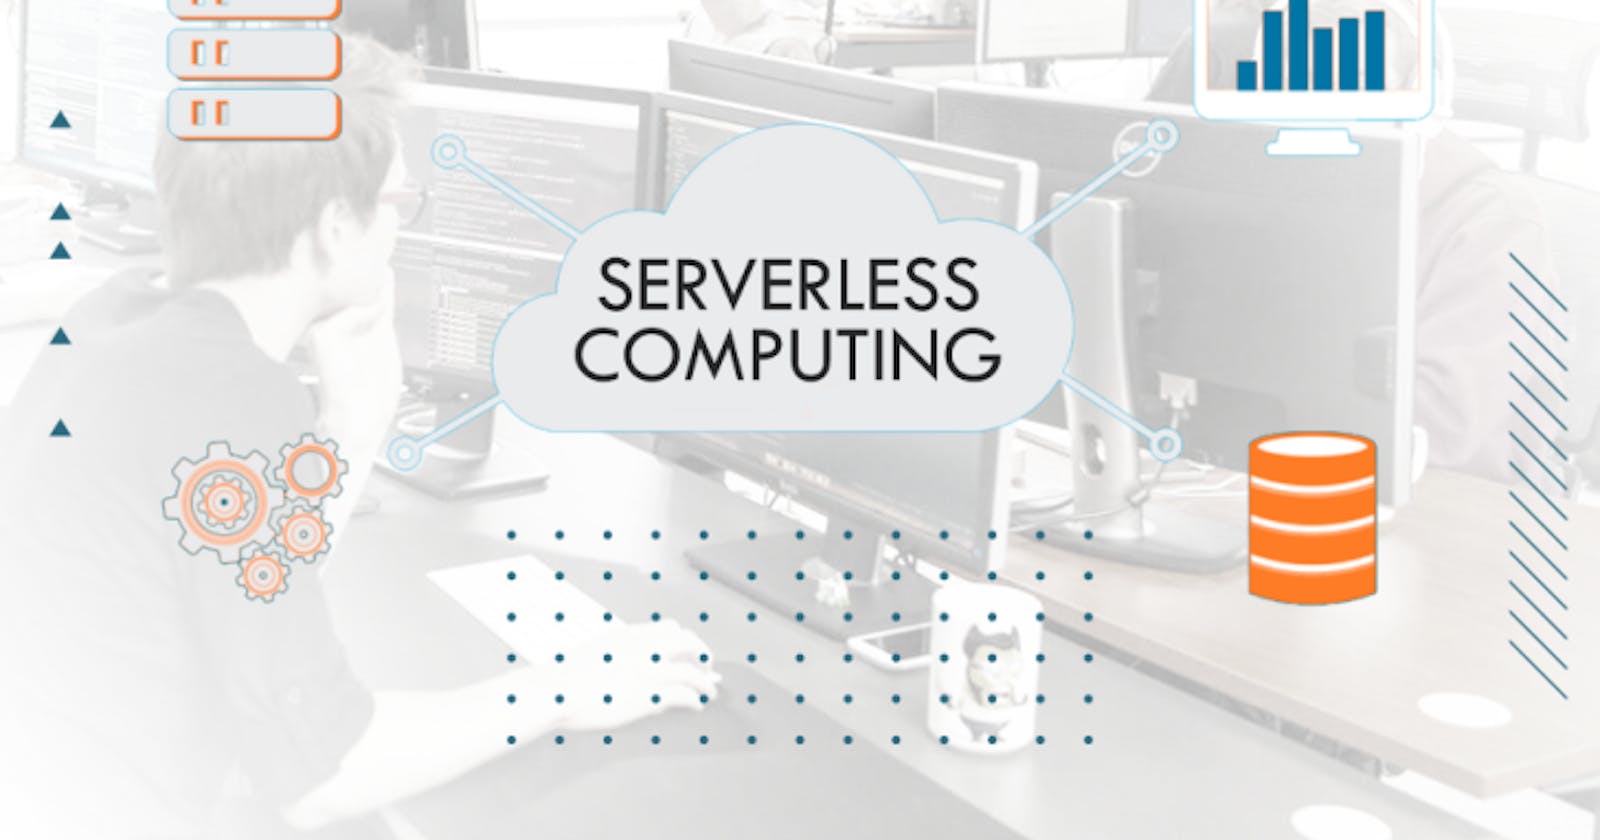 What is serverless computing? Is this thing for me?